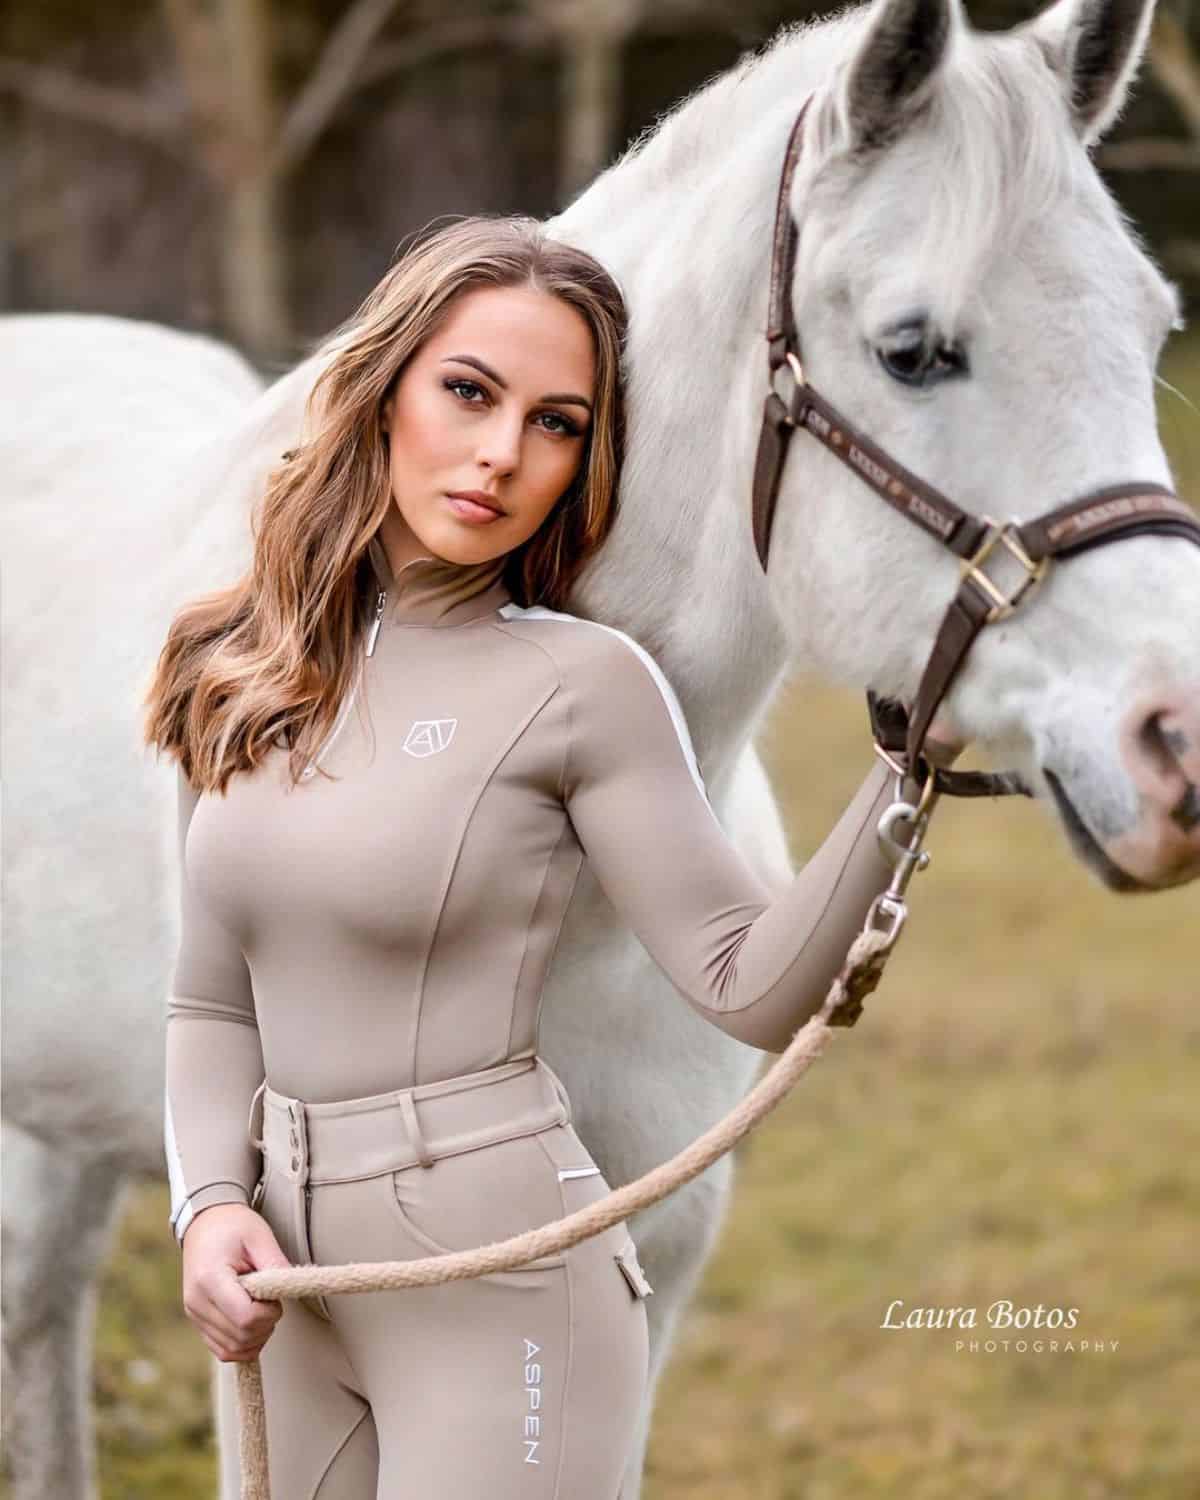 A young woman in an equestrian outfit stands next to a white horse.